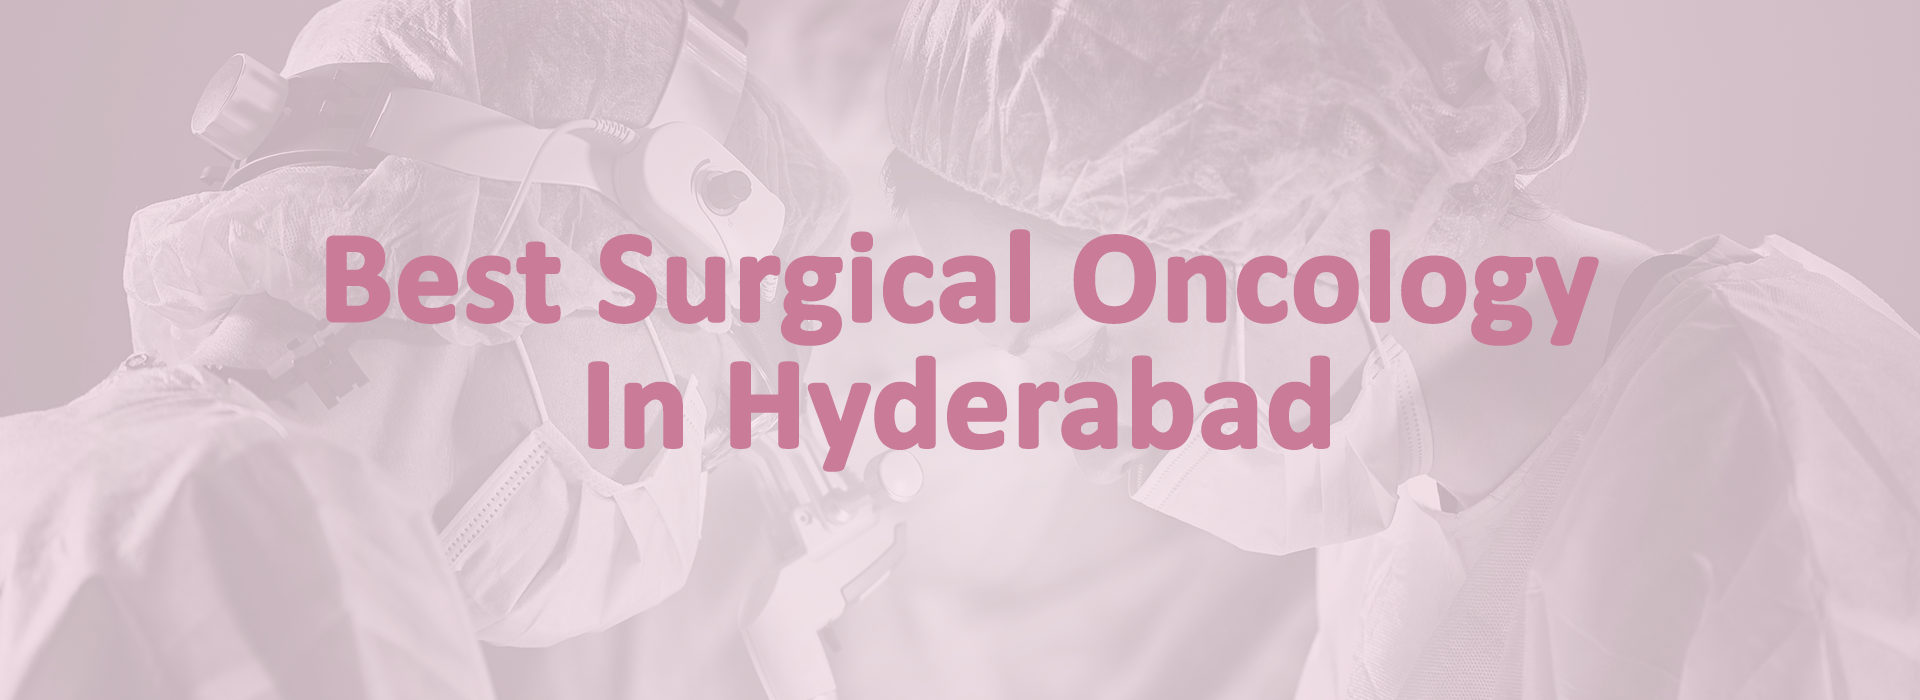 Best Surgical Oncology In Hyderabad